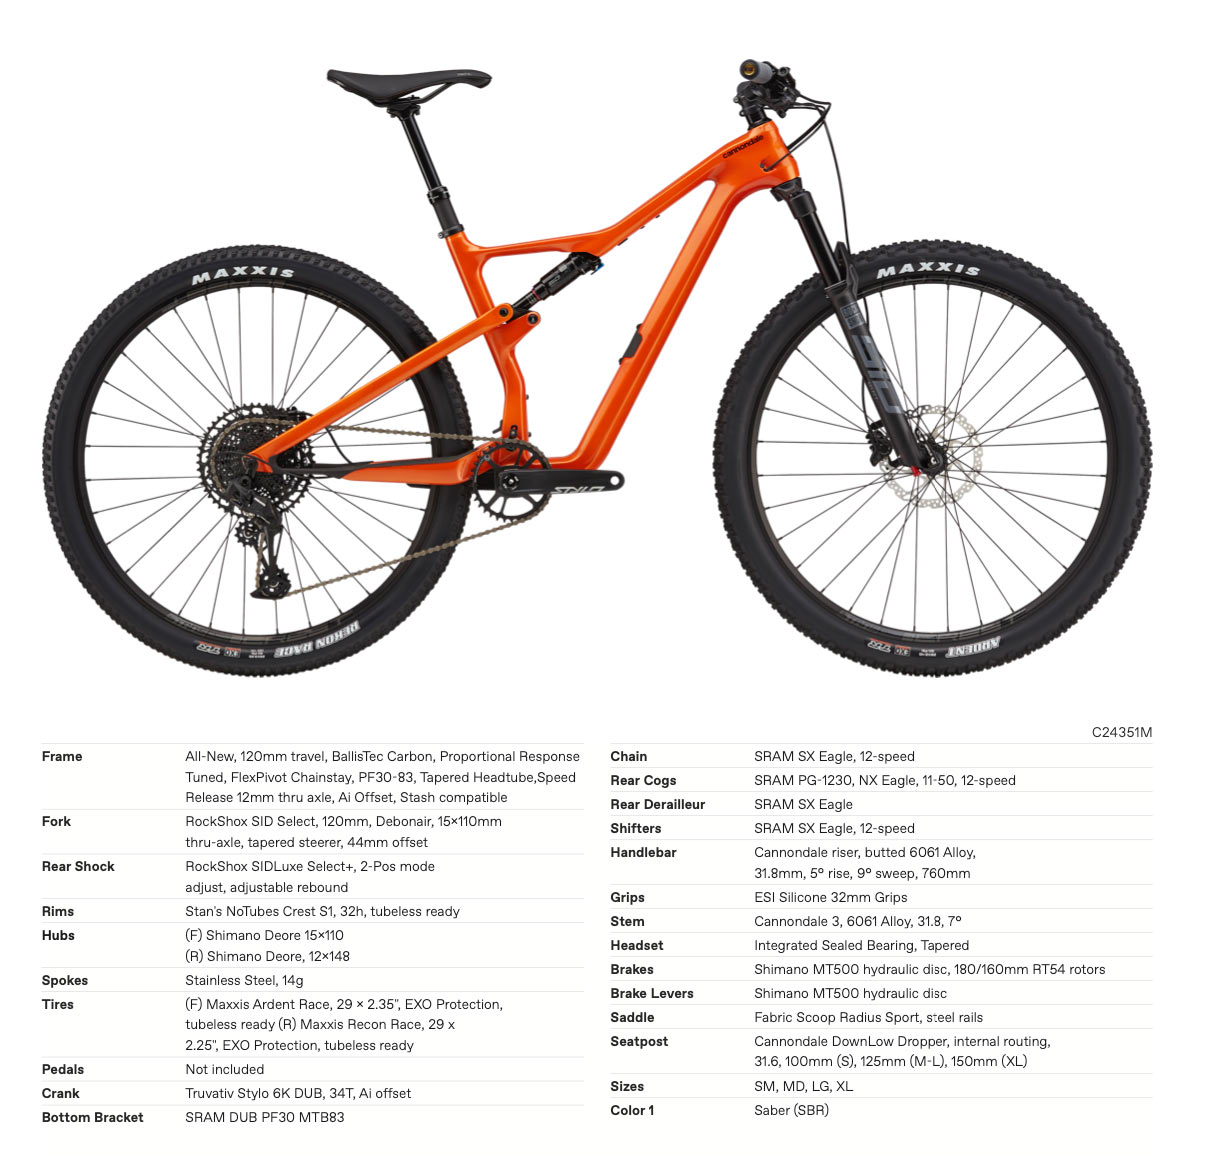 2021 Cannondale Scalpel SE 2 mountain bike specs and build components